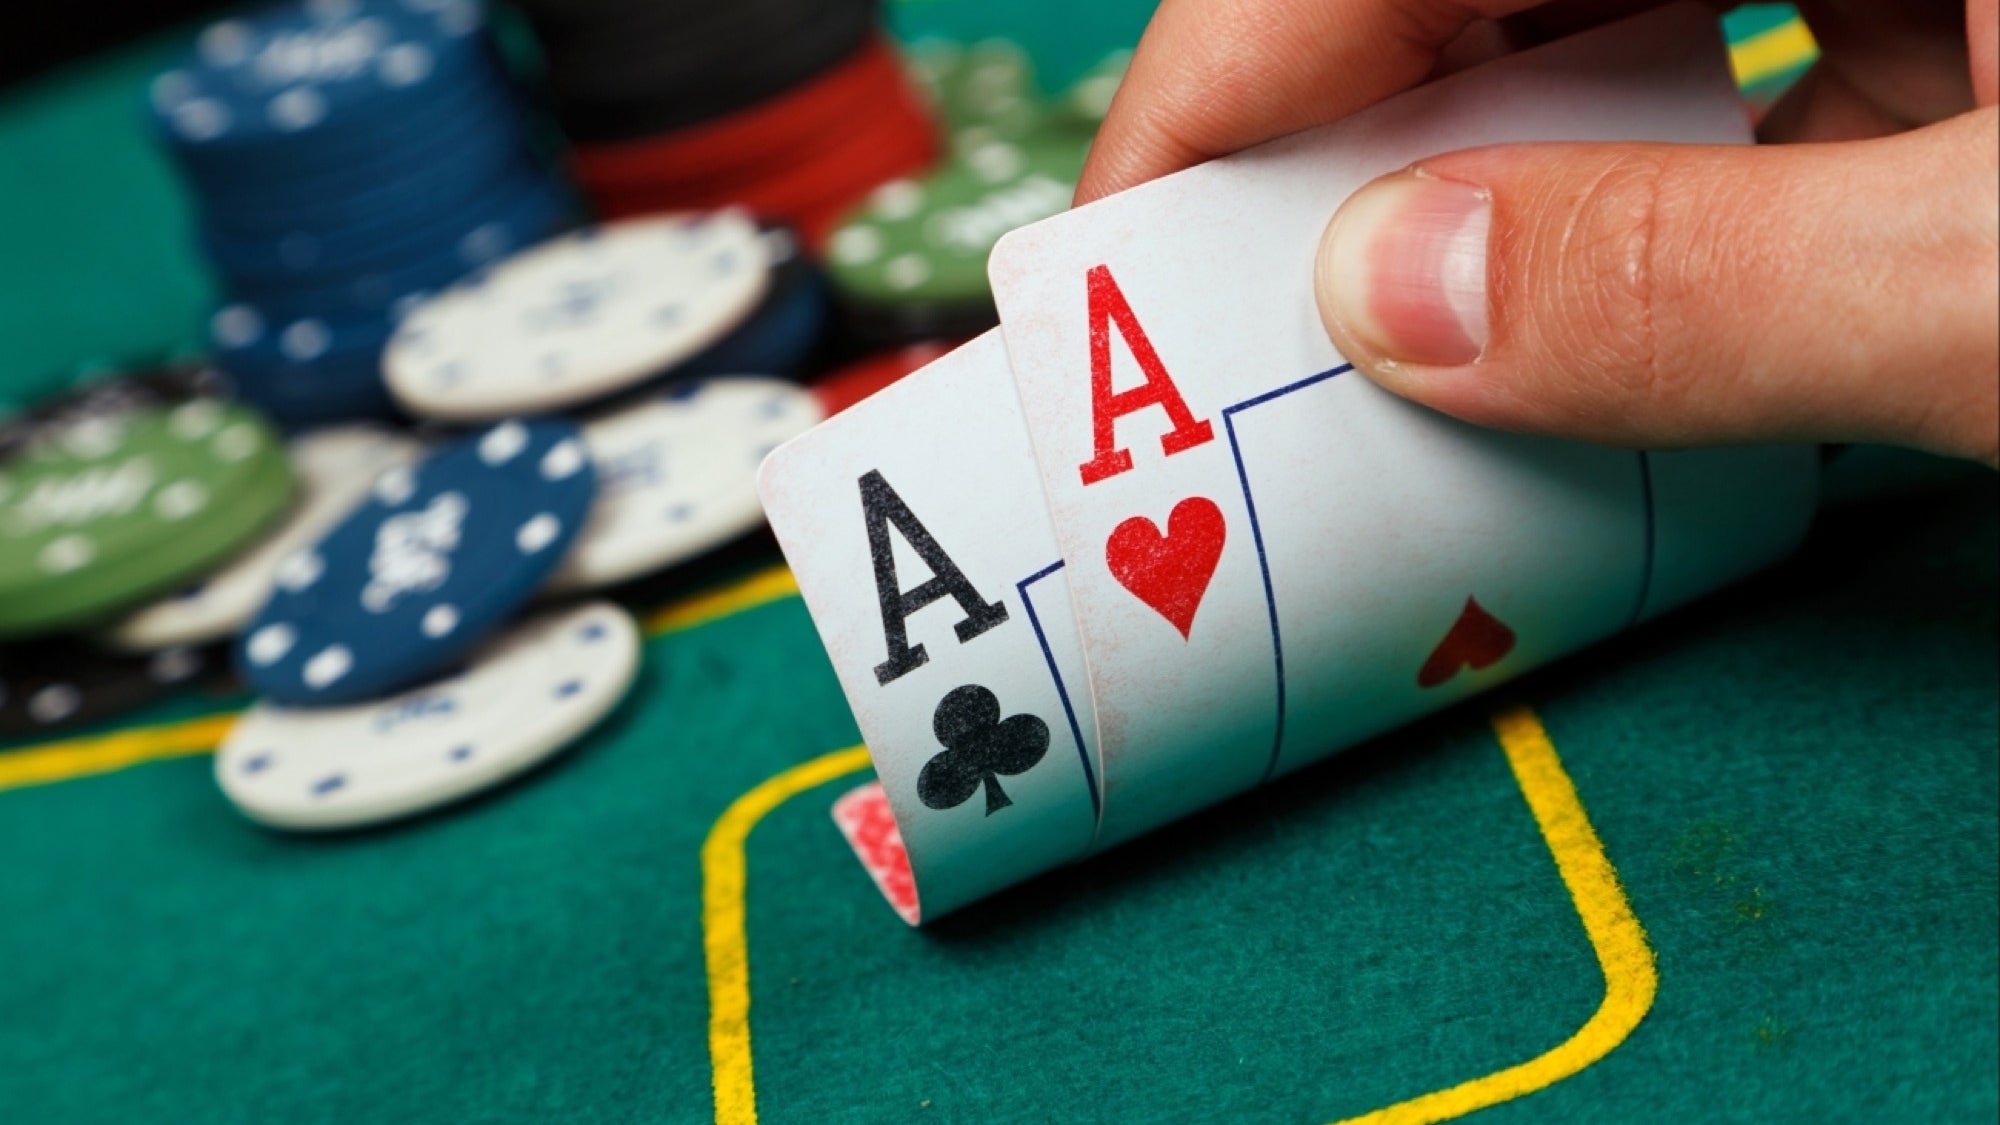 Types Of Poker Card Games To Kill Time